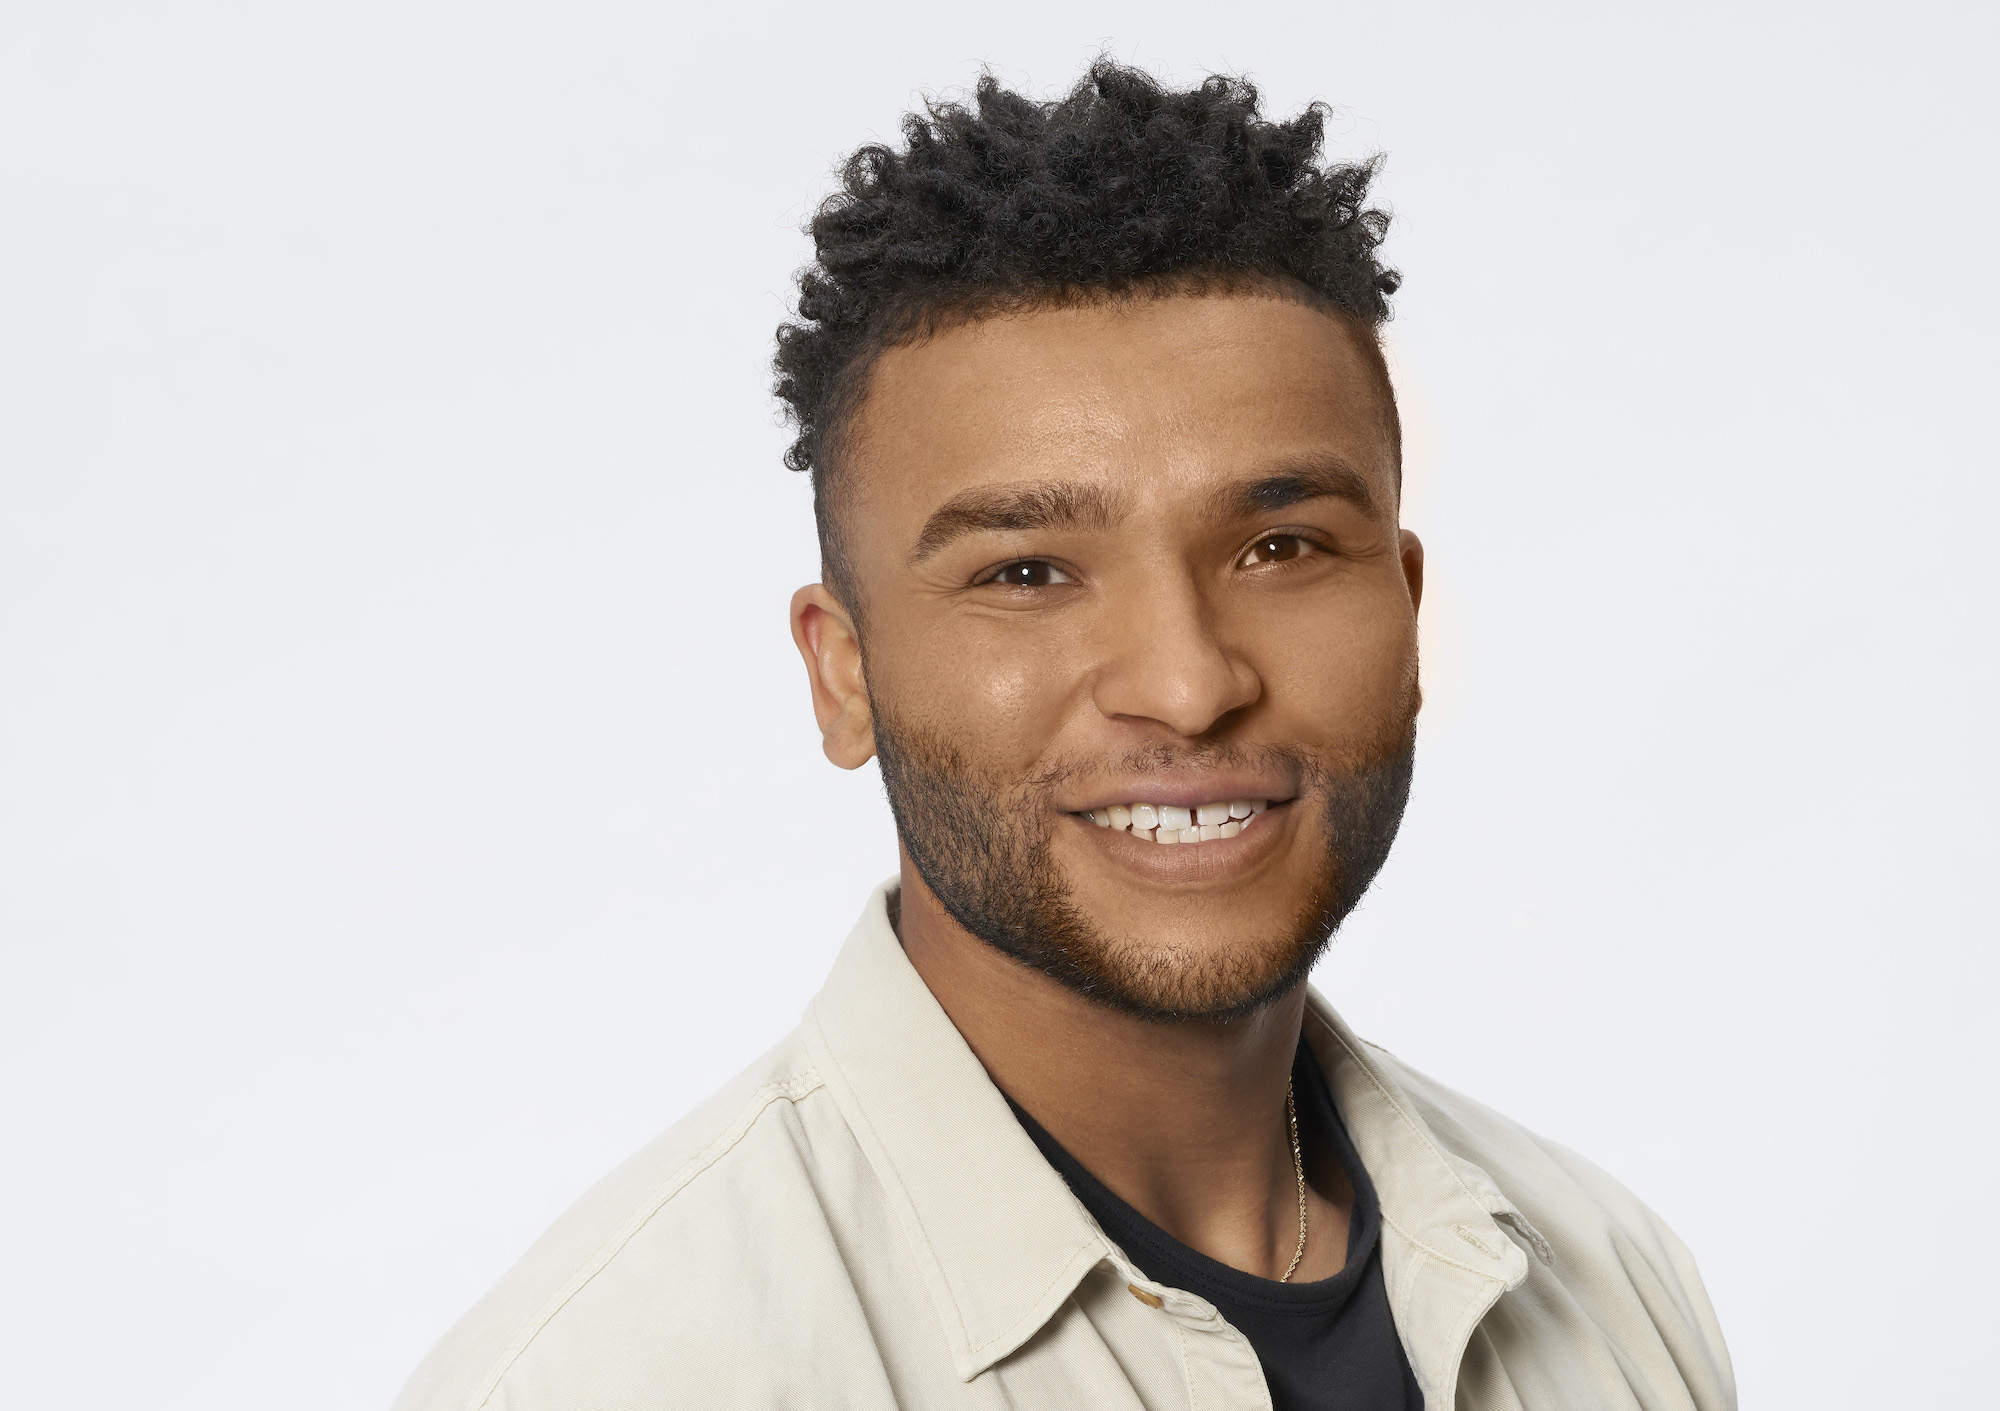 Daniel Tully in his headshot for the 'The Bachelorette' wearing a tan jacket and black tshirt.